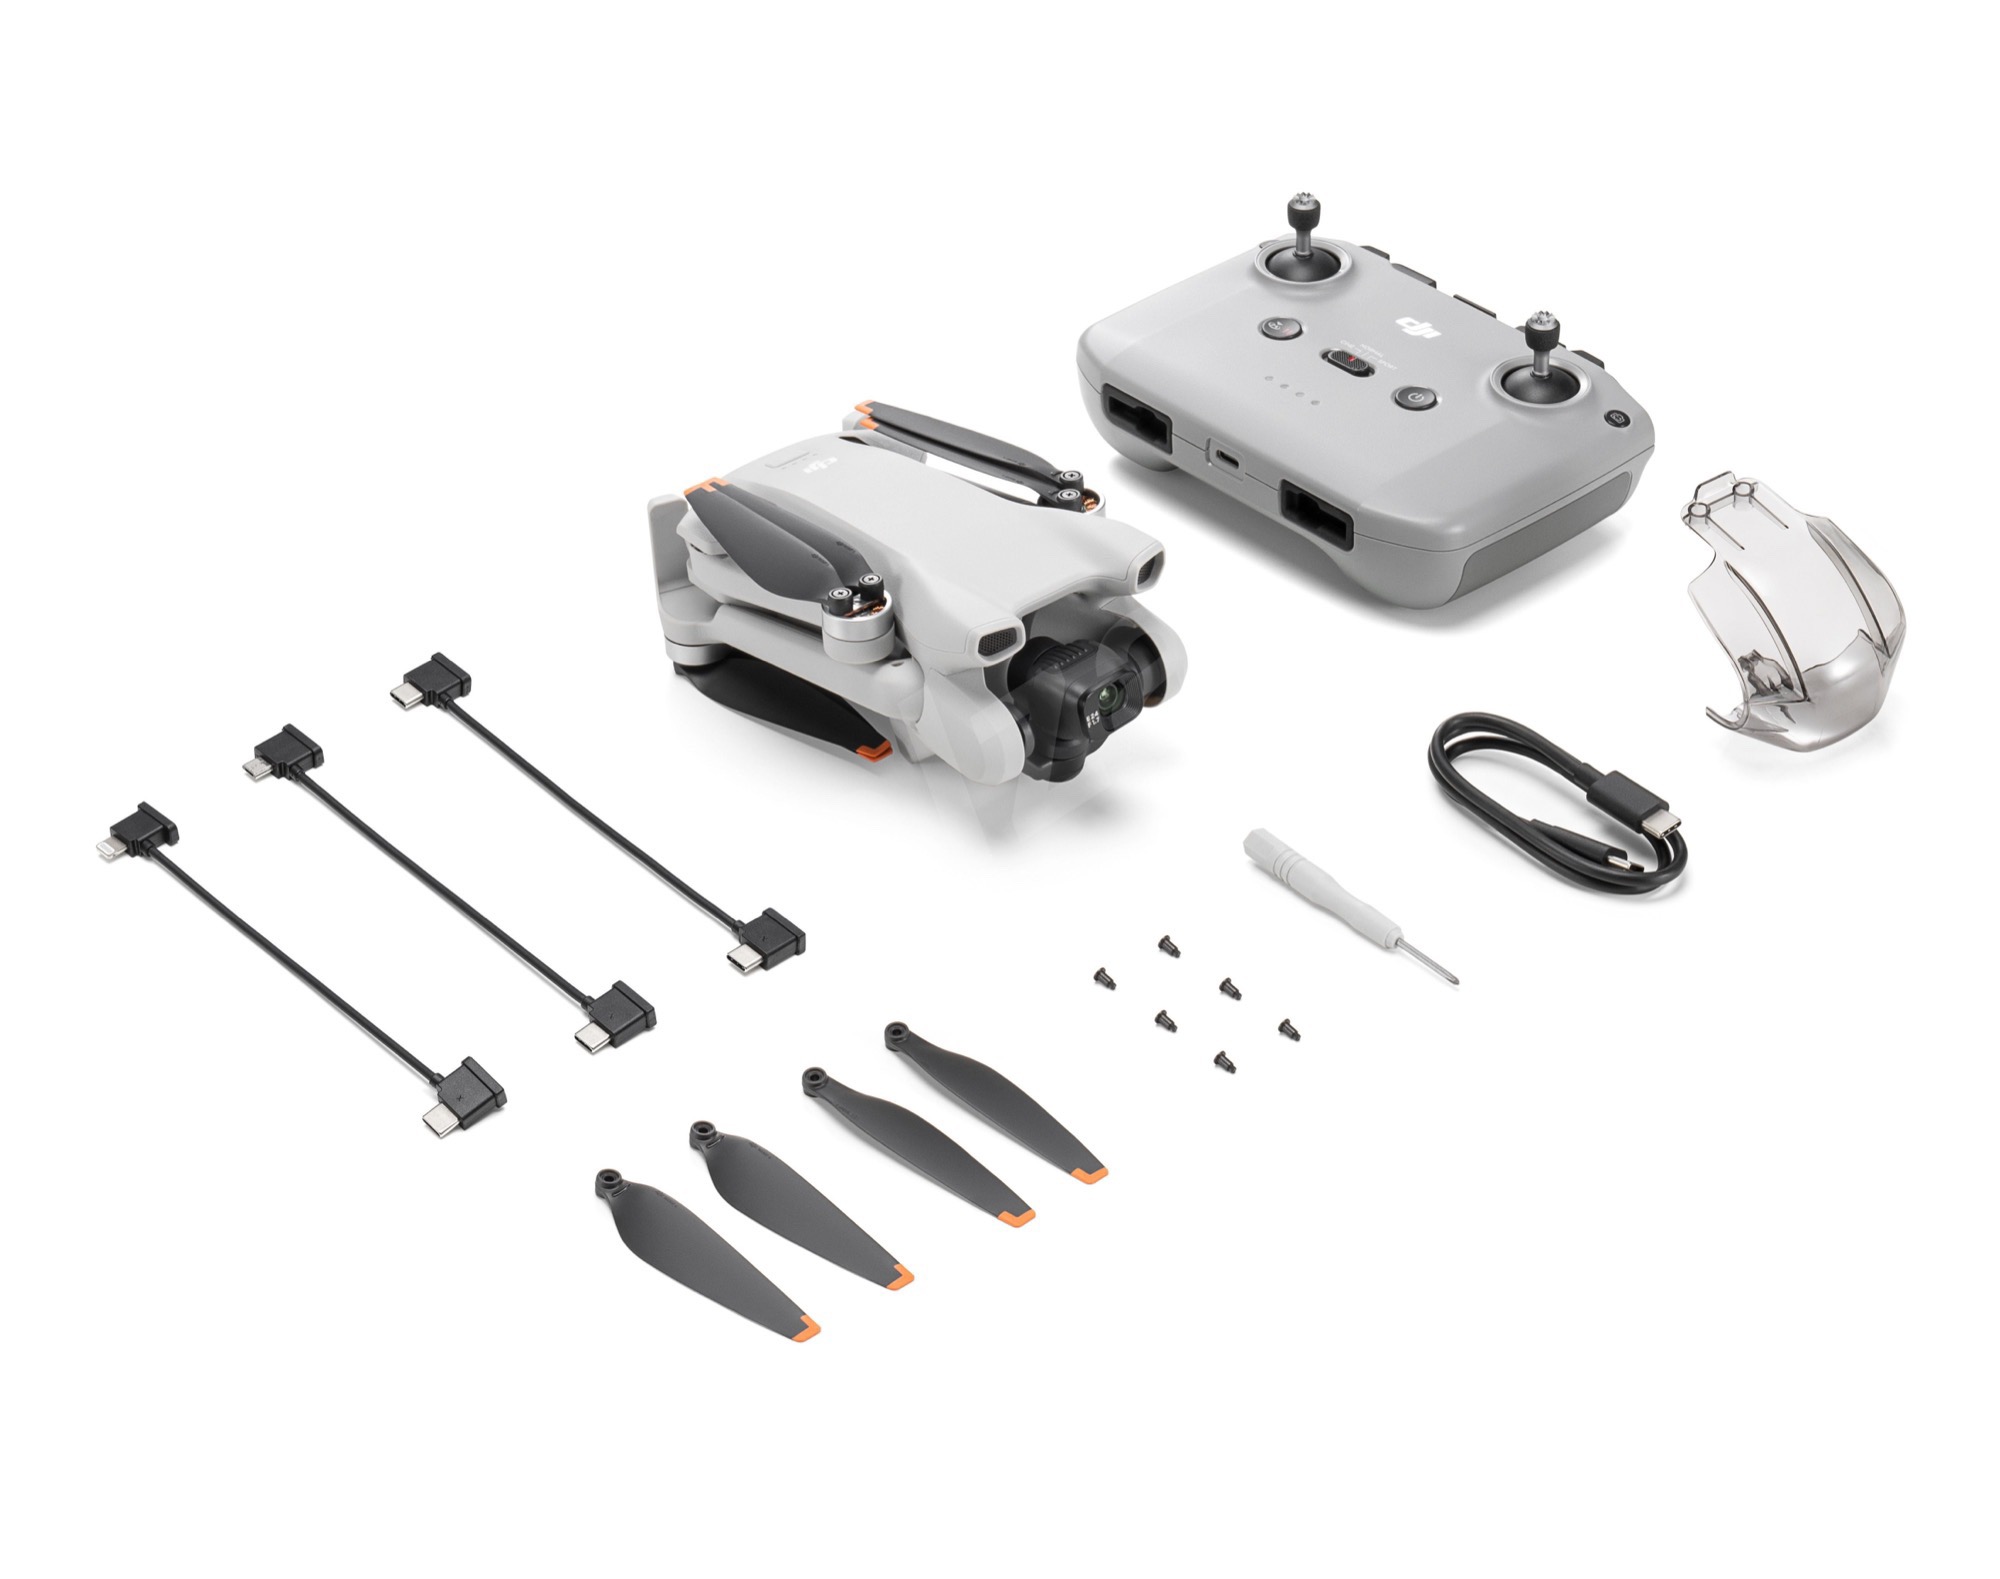 DJI Mini 3: Retailer confirms specifications and European pricing with RC-N1  remote controller bundle - NotebookCheck.net News